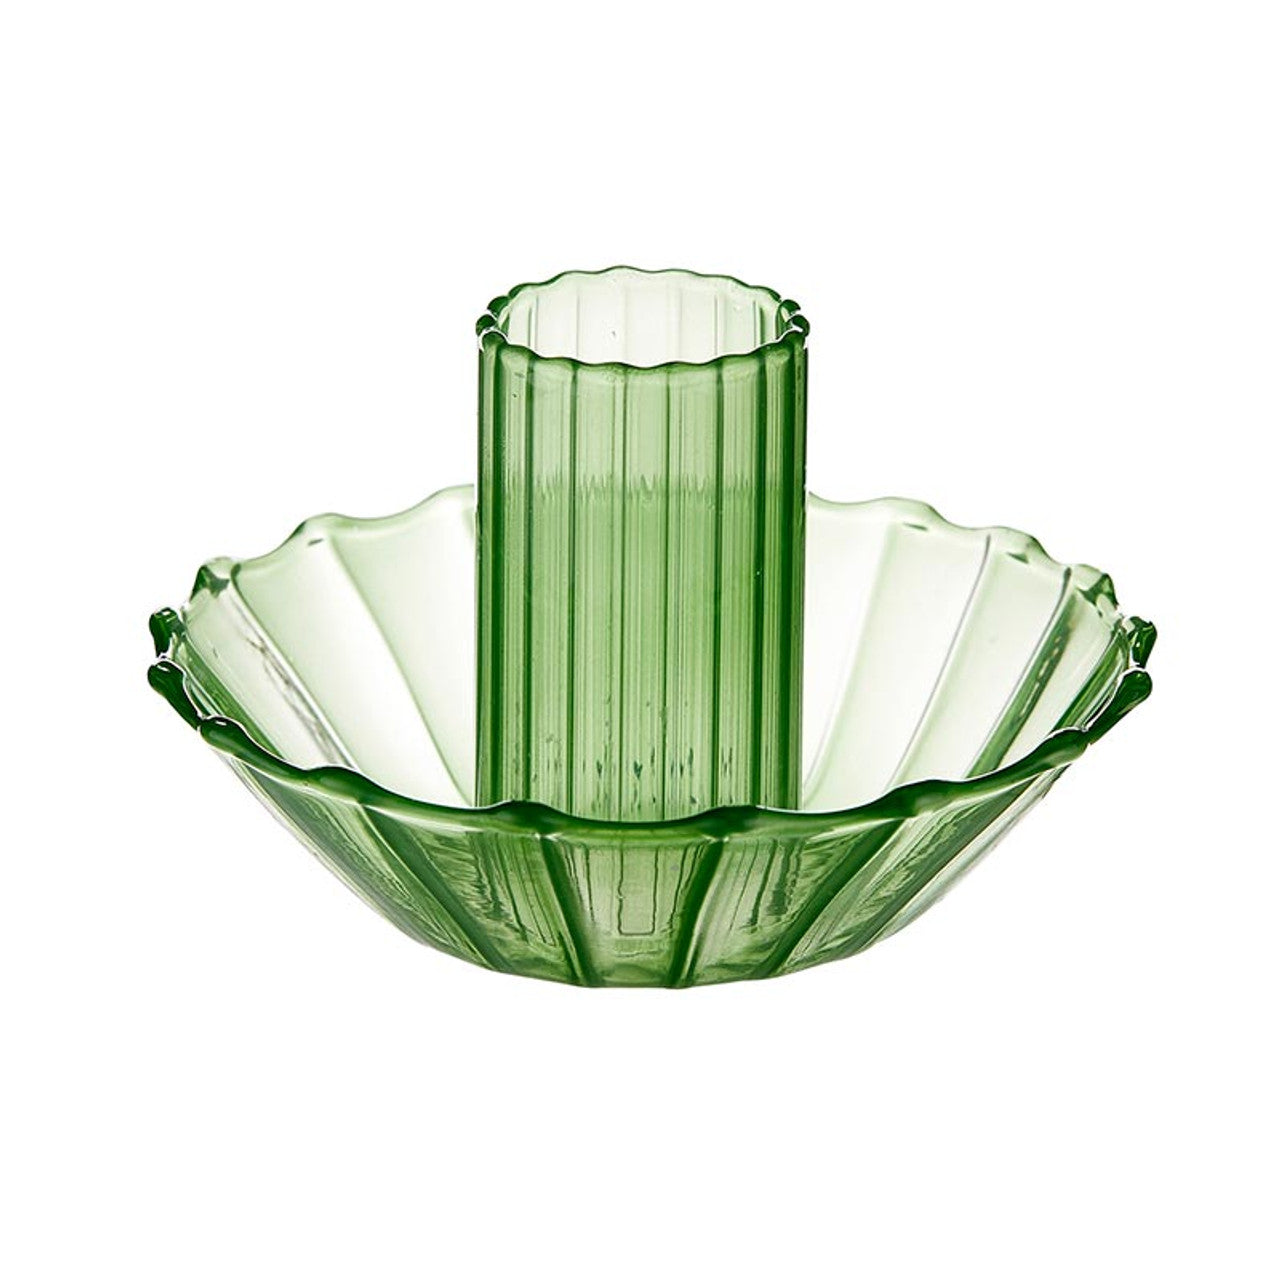 Glass Candle Holder in Green | Aesthetic Tinted Glass Candle Sticks Decorative Candle Holder | 3.5"